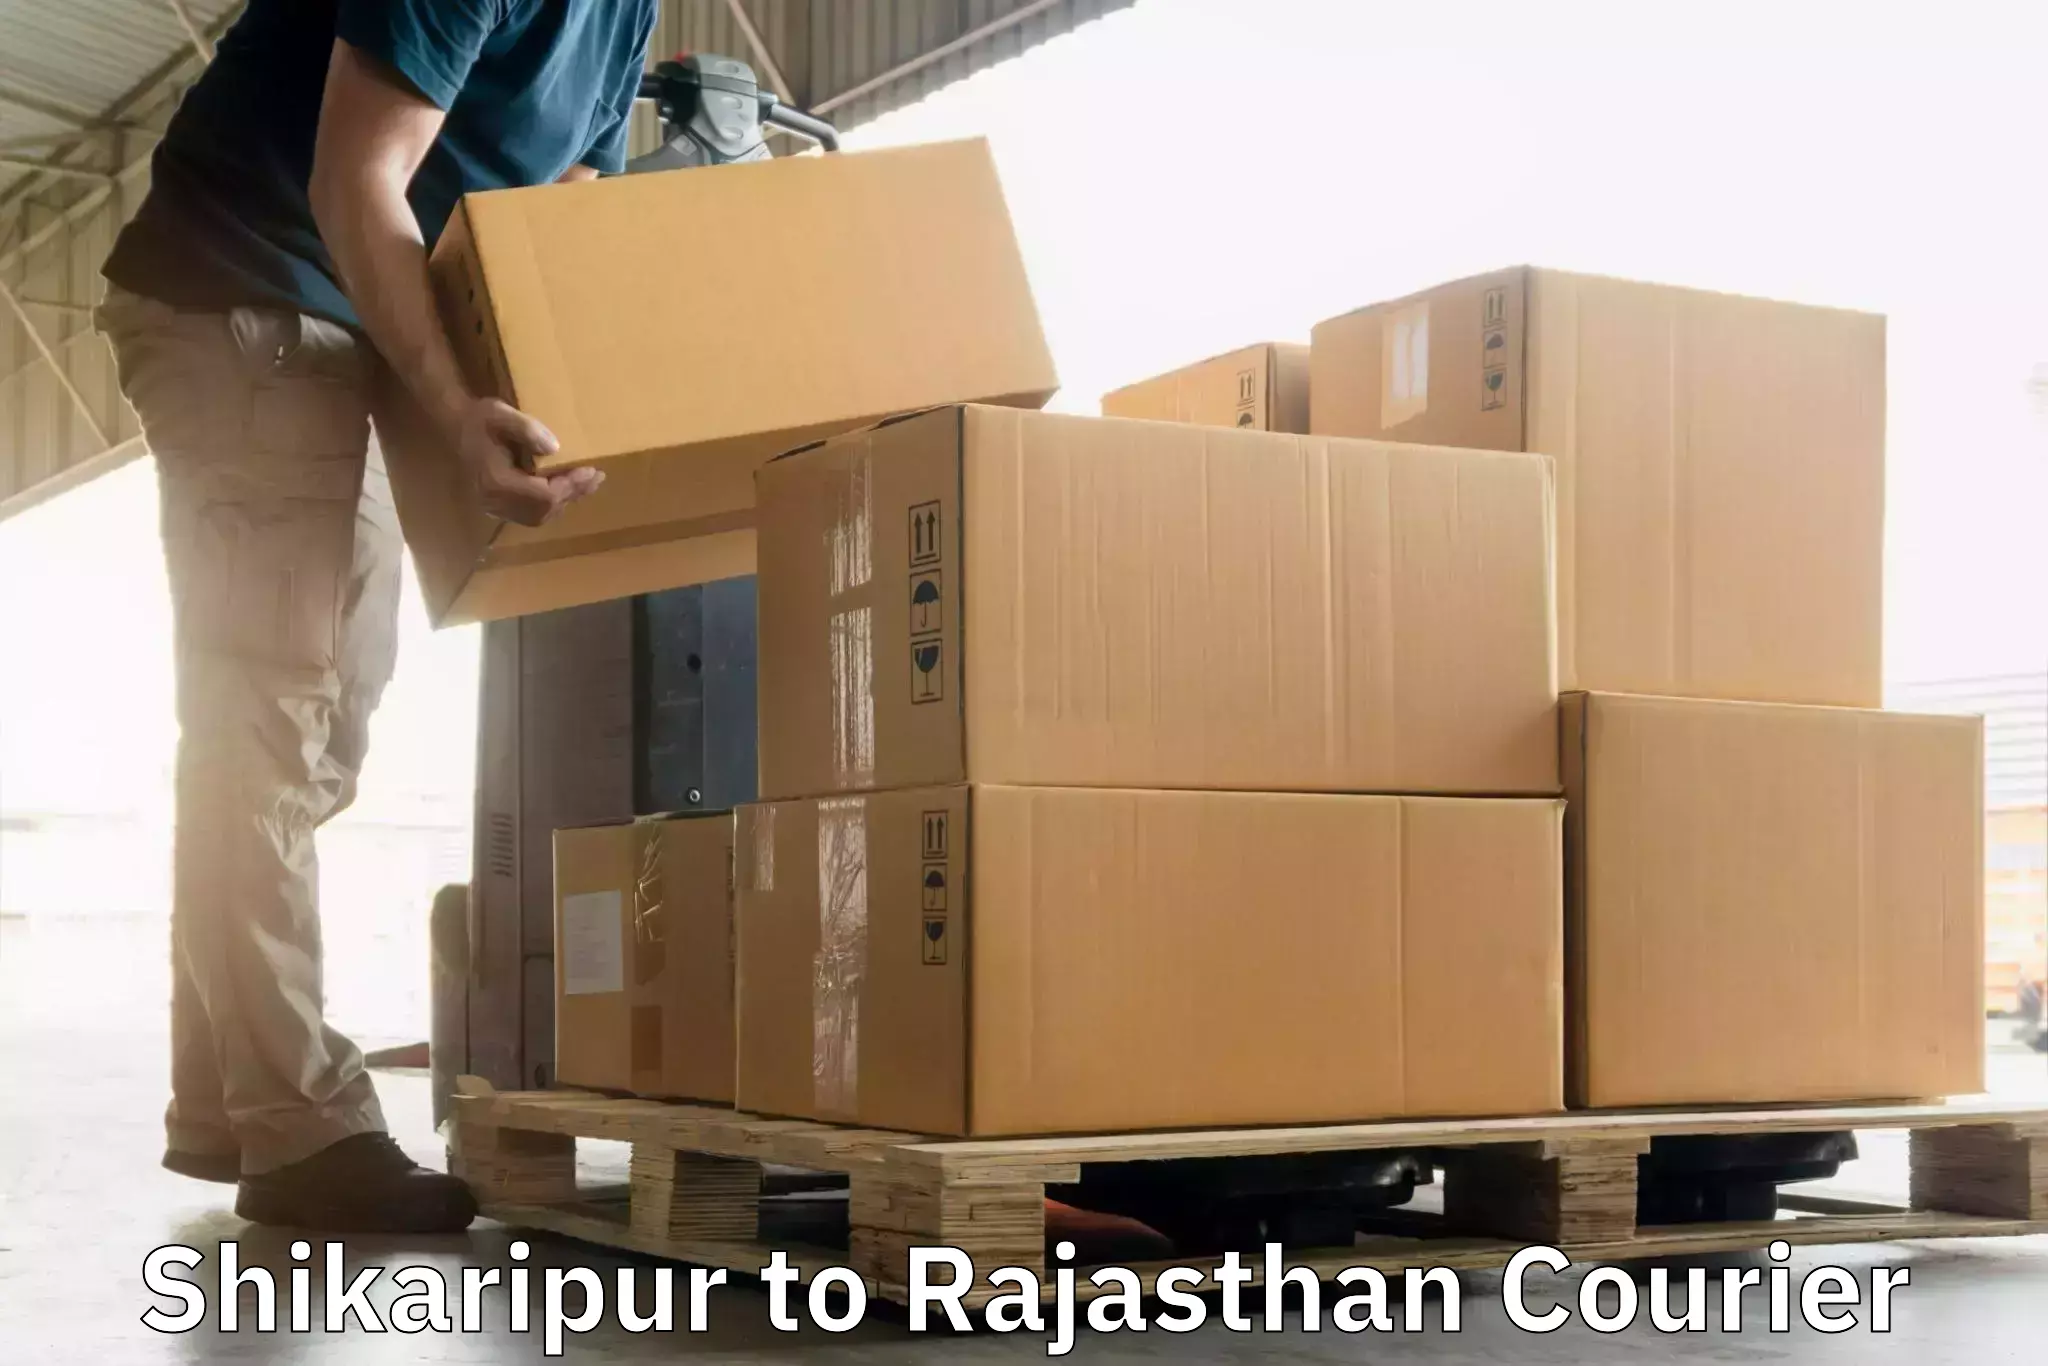 Courier dispatch services Shikaripur to Parbatsar